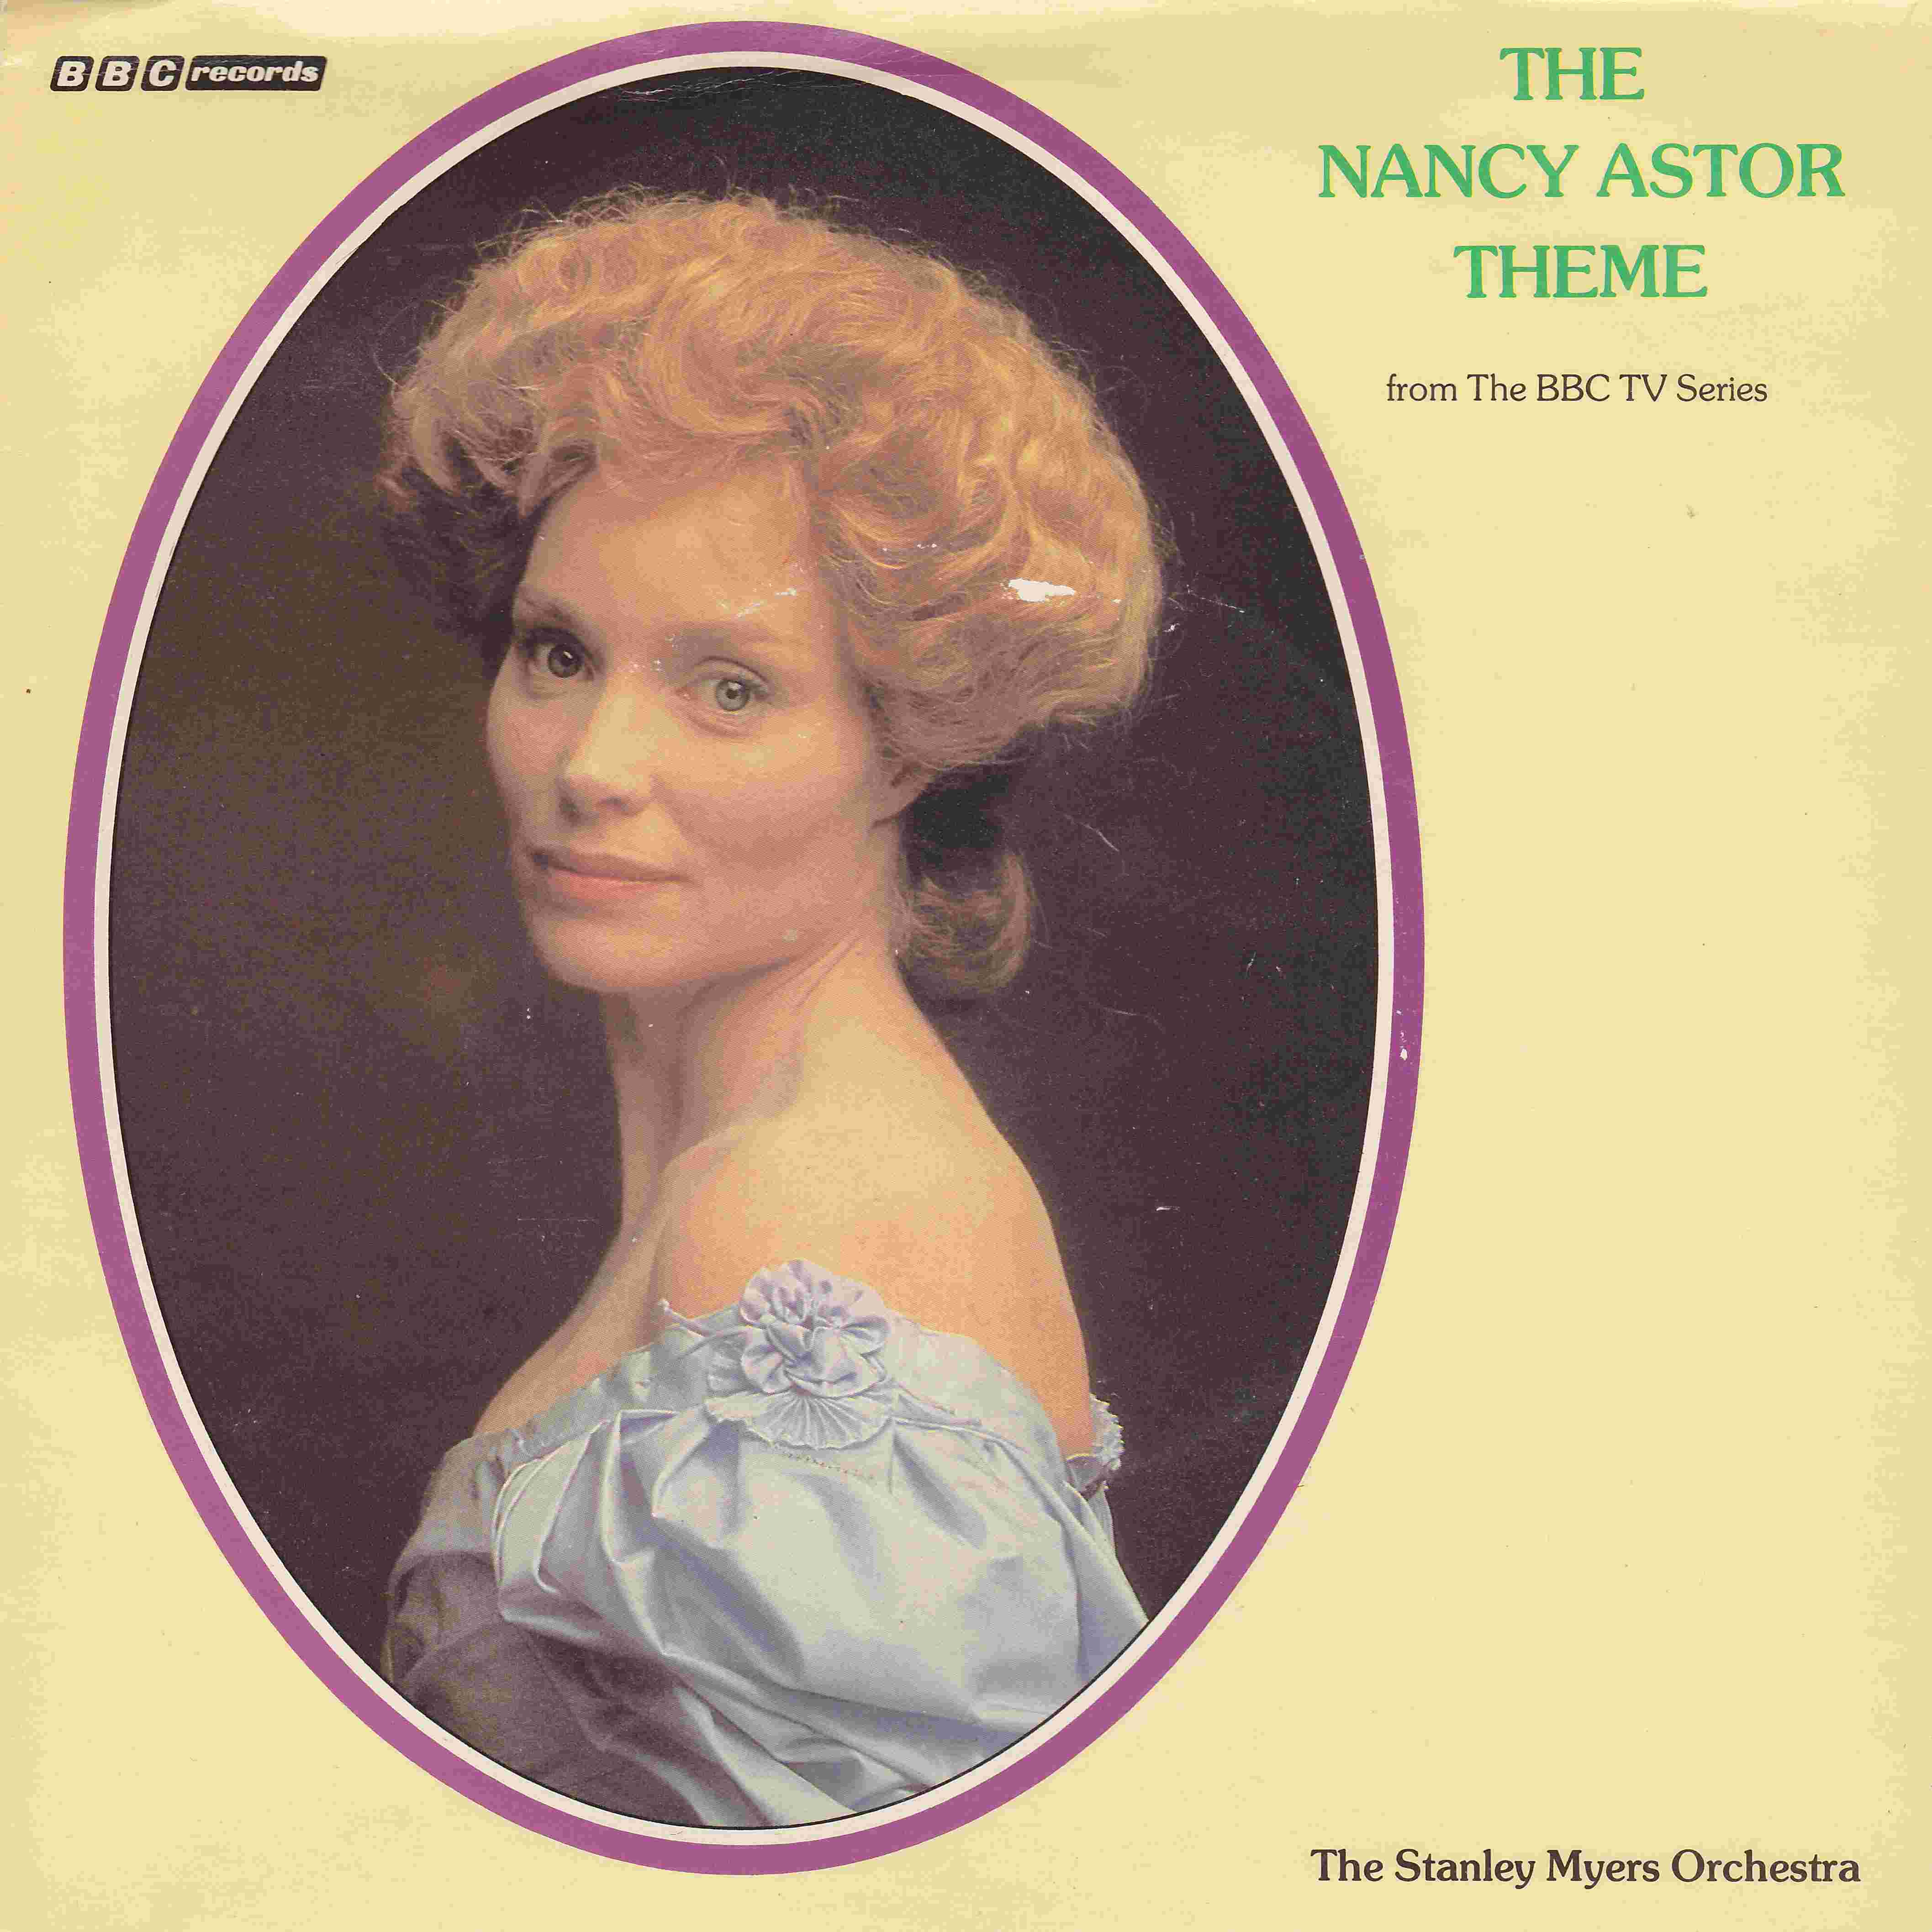 Picture of RESL 110 Nancy Astor by artist Stanley Myers from the BBC records and Tapes library